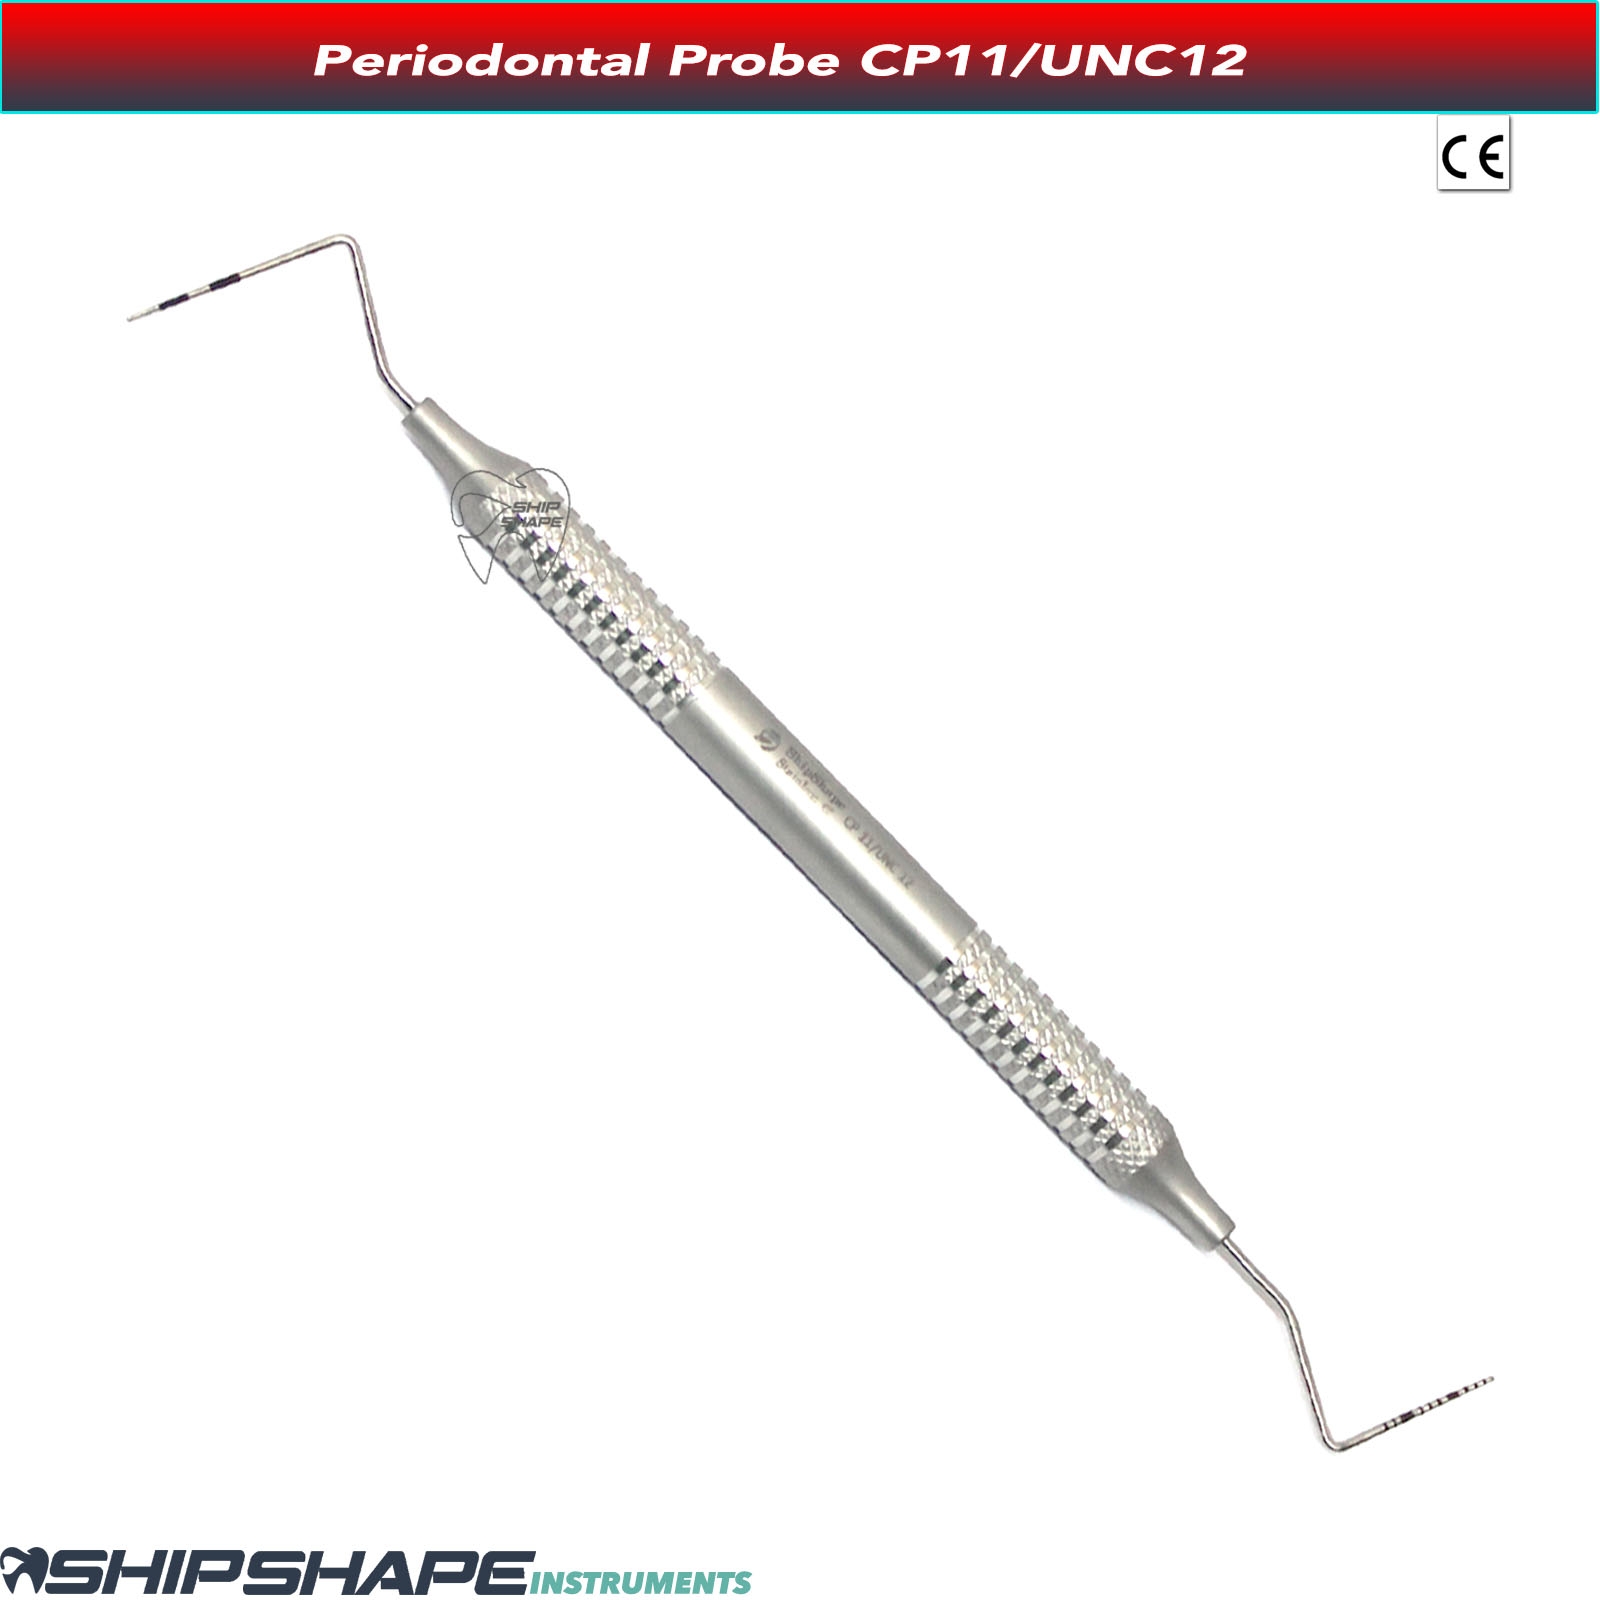 Dental Probe CP11 / UNC12 Color Coded Marking Periodontal Diagnostic | Shipshape Instruments-1361